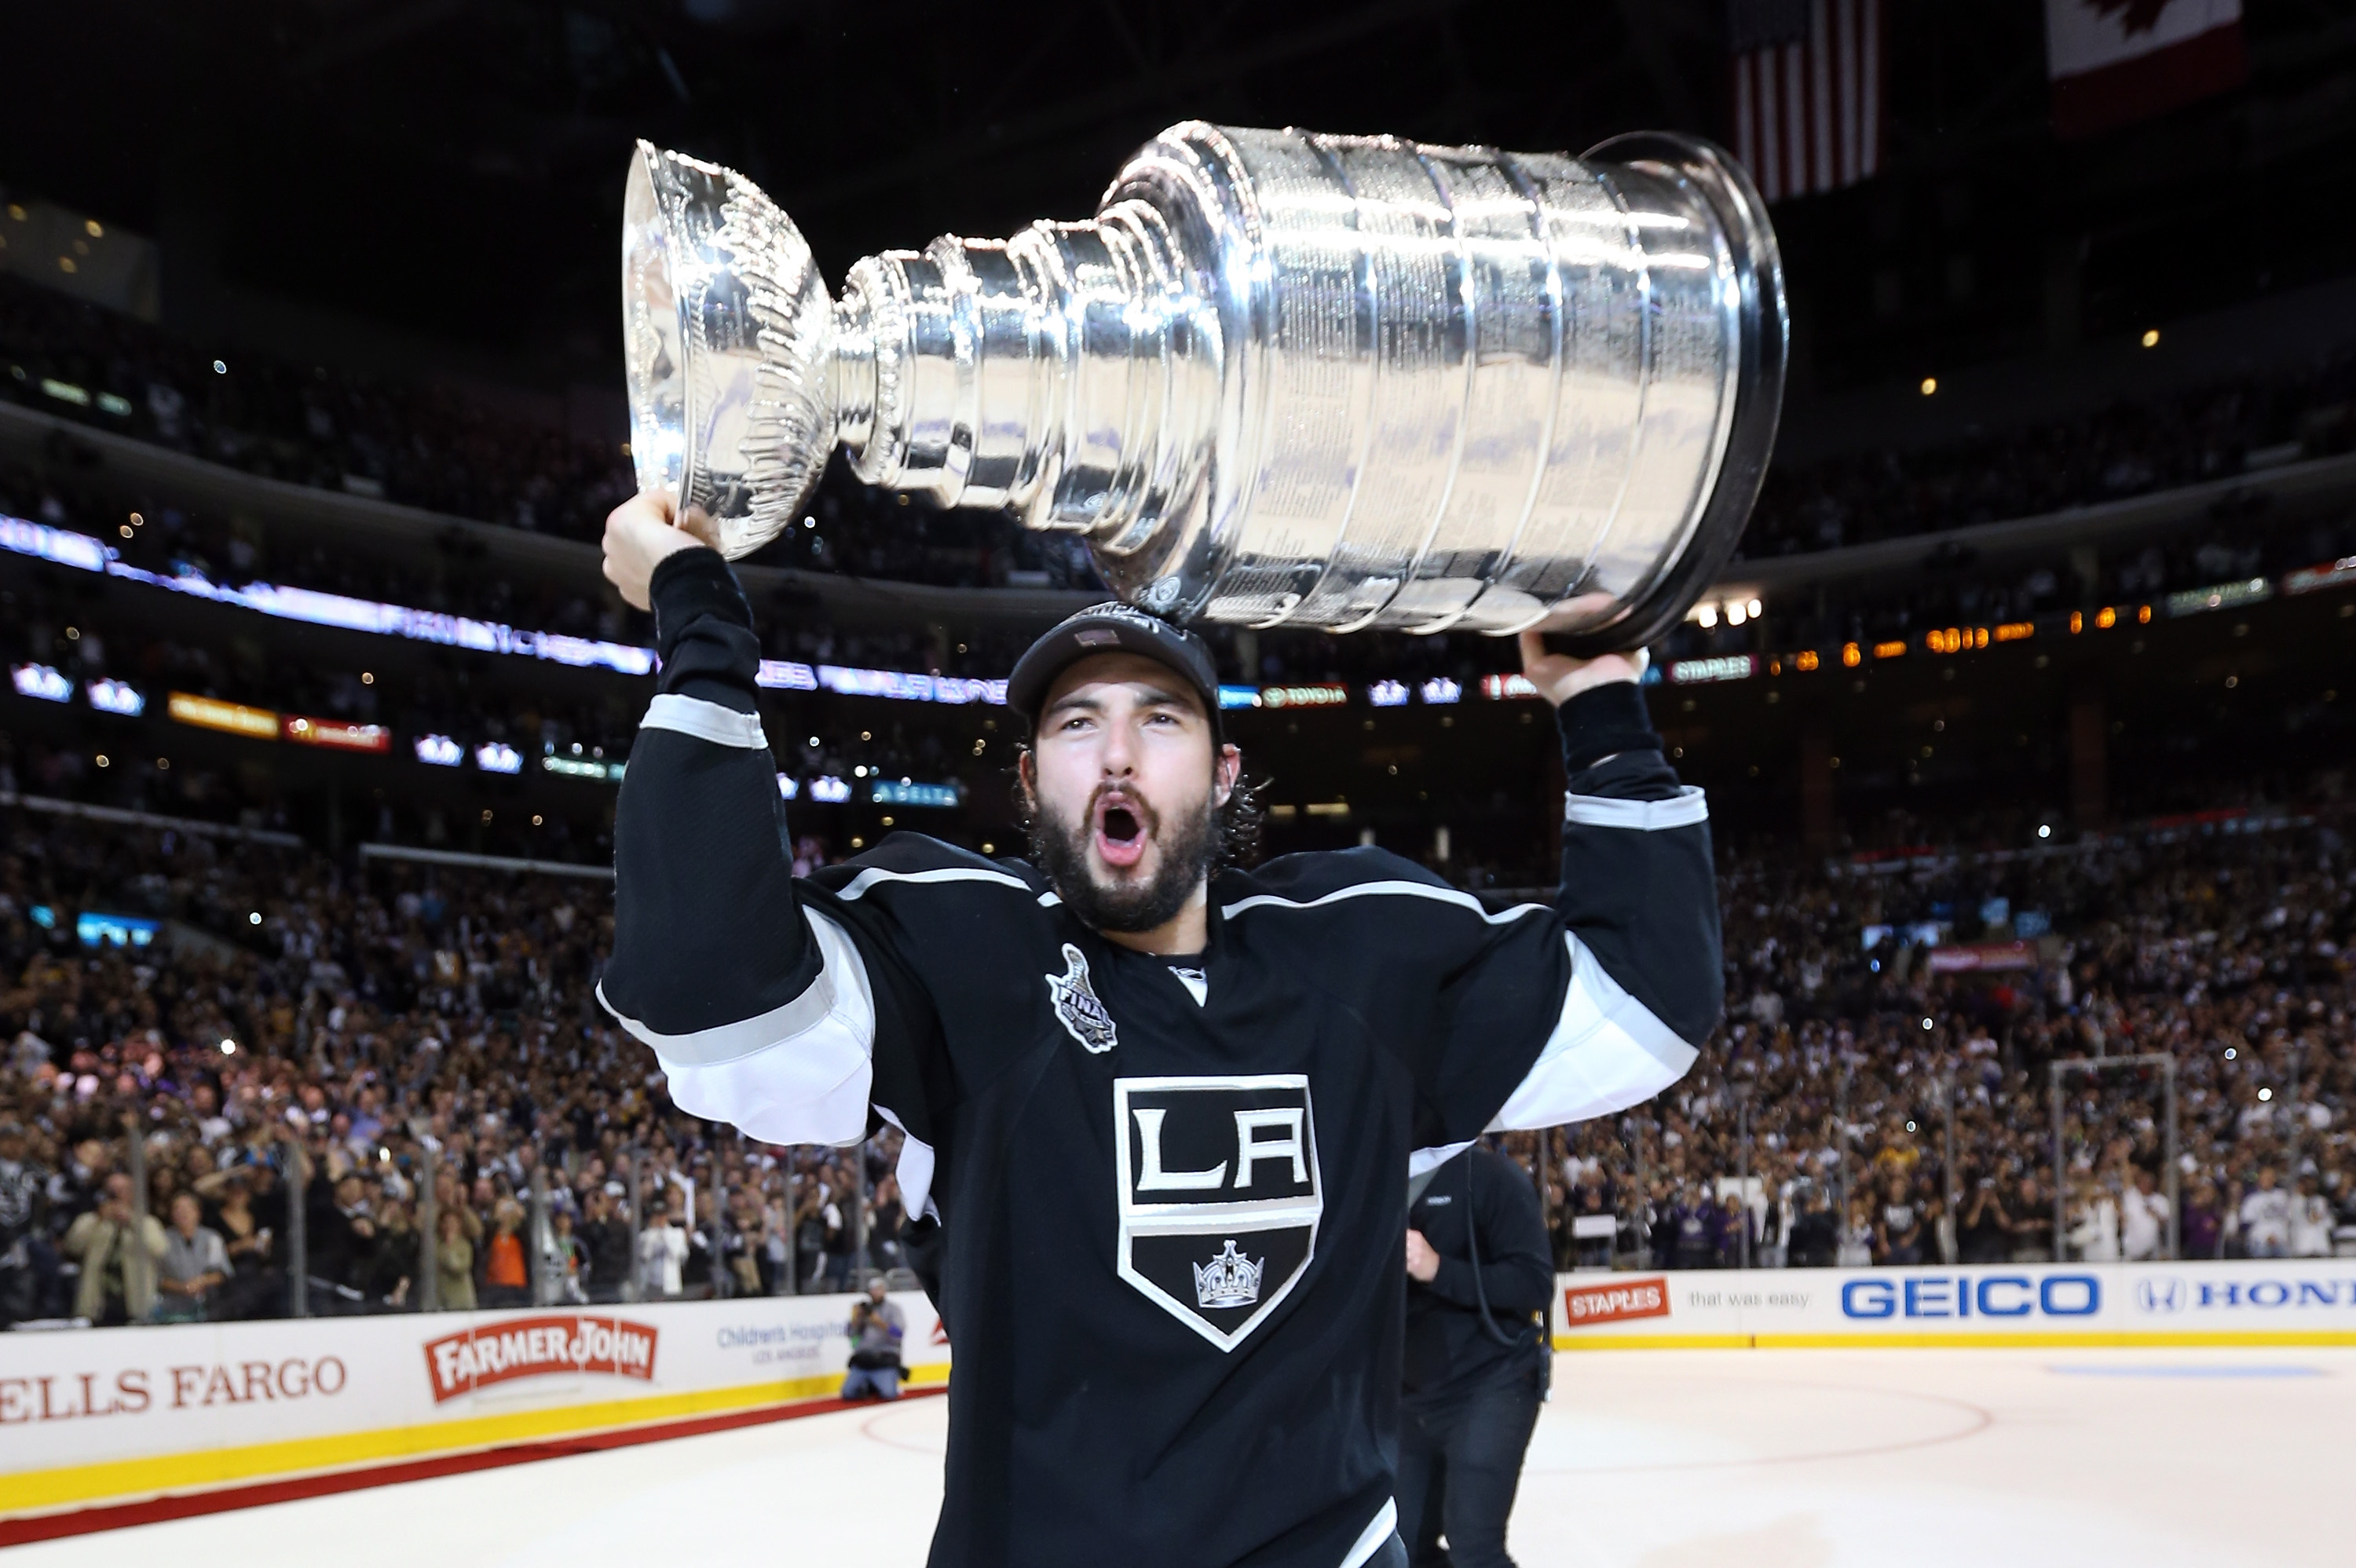 Best Hockey Player Drew Doughty And His Trophy Wallpaper